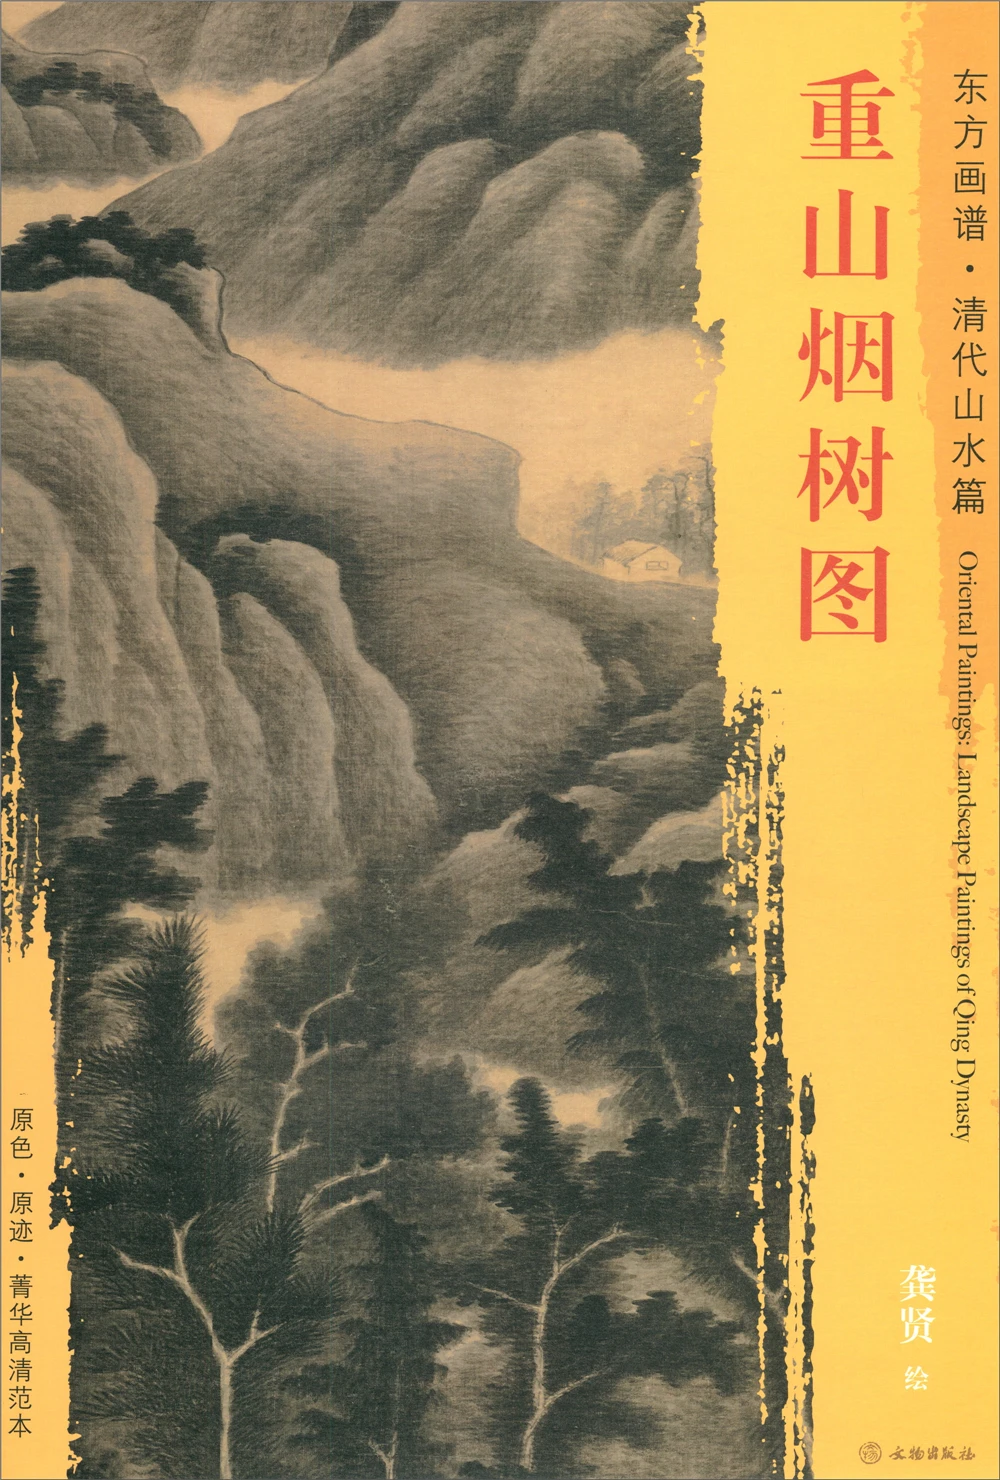 

Oriental Paintings. Landscapes in the Qing Dynasty Sketch book Art Drawing high-quality Painting copyBook for training